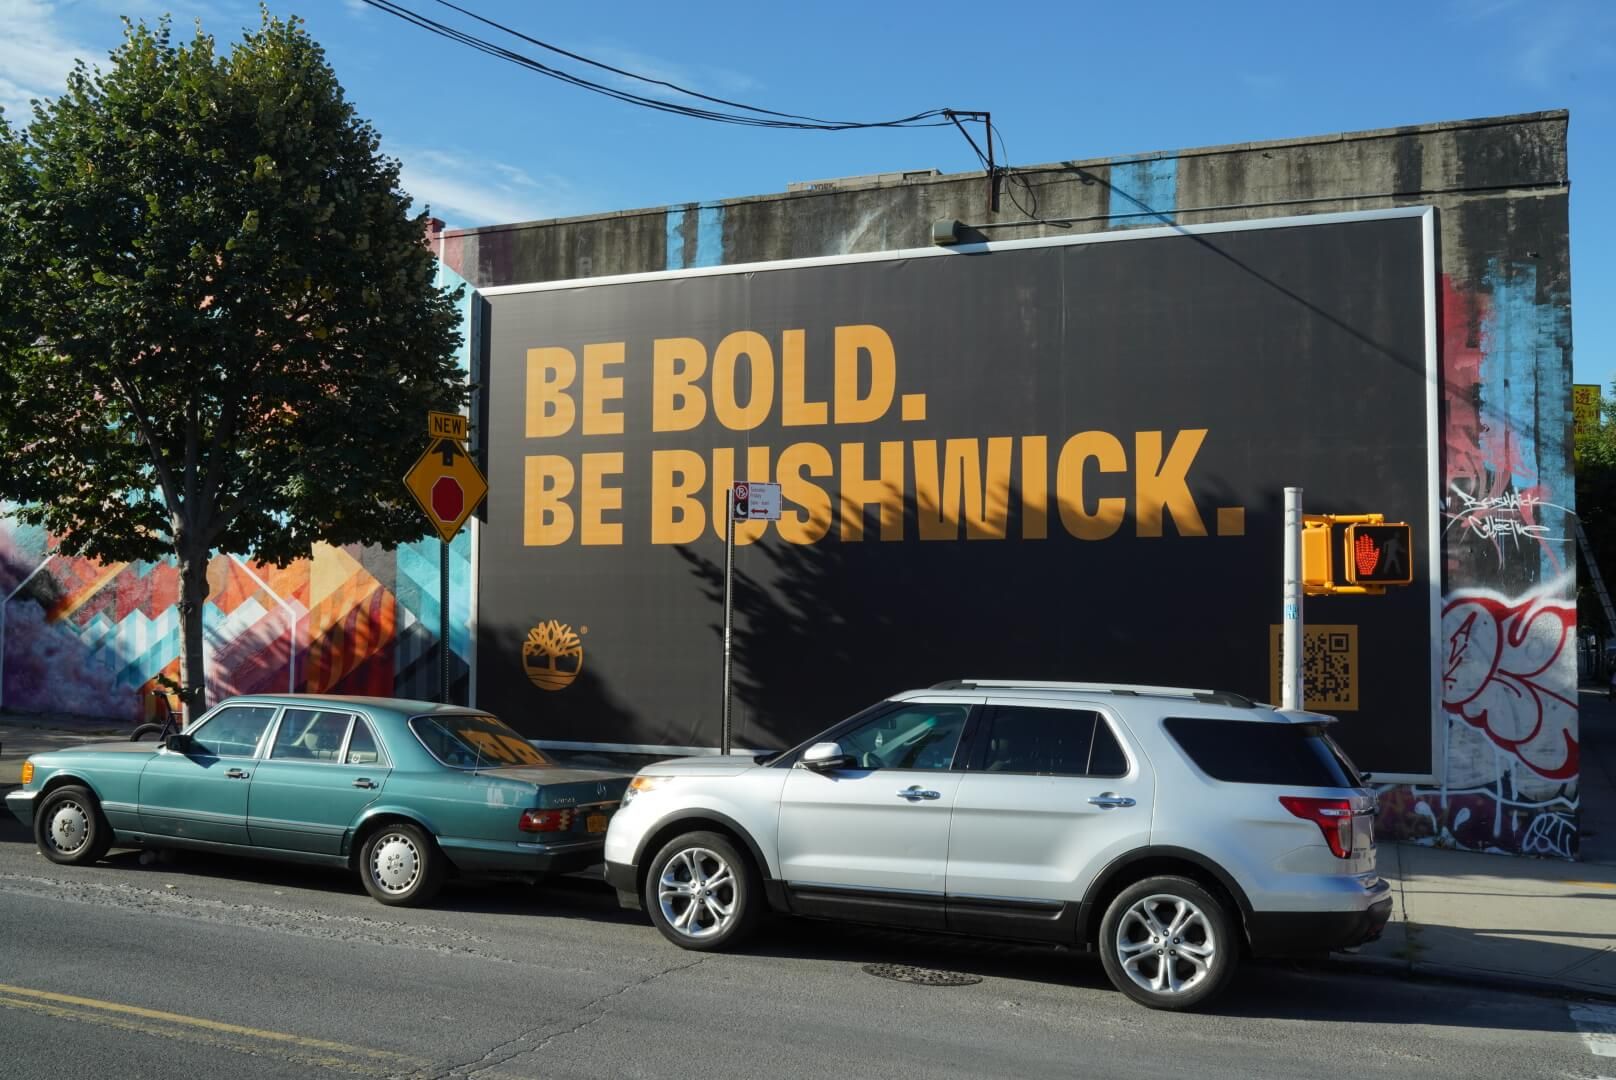 Timberland Be Bold. Be Bushwick. Billboard on street with two cars parked in front